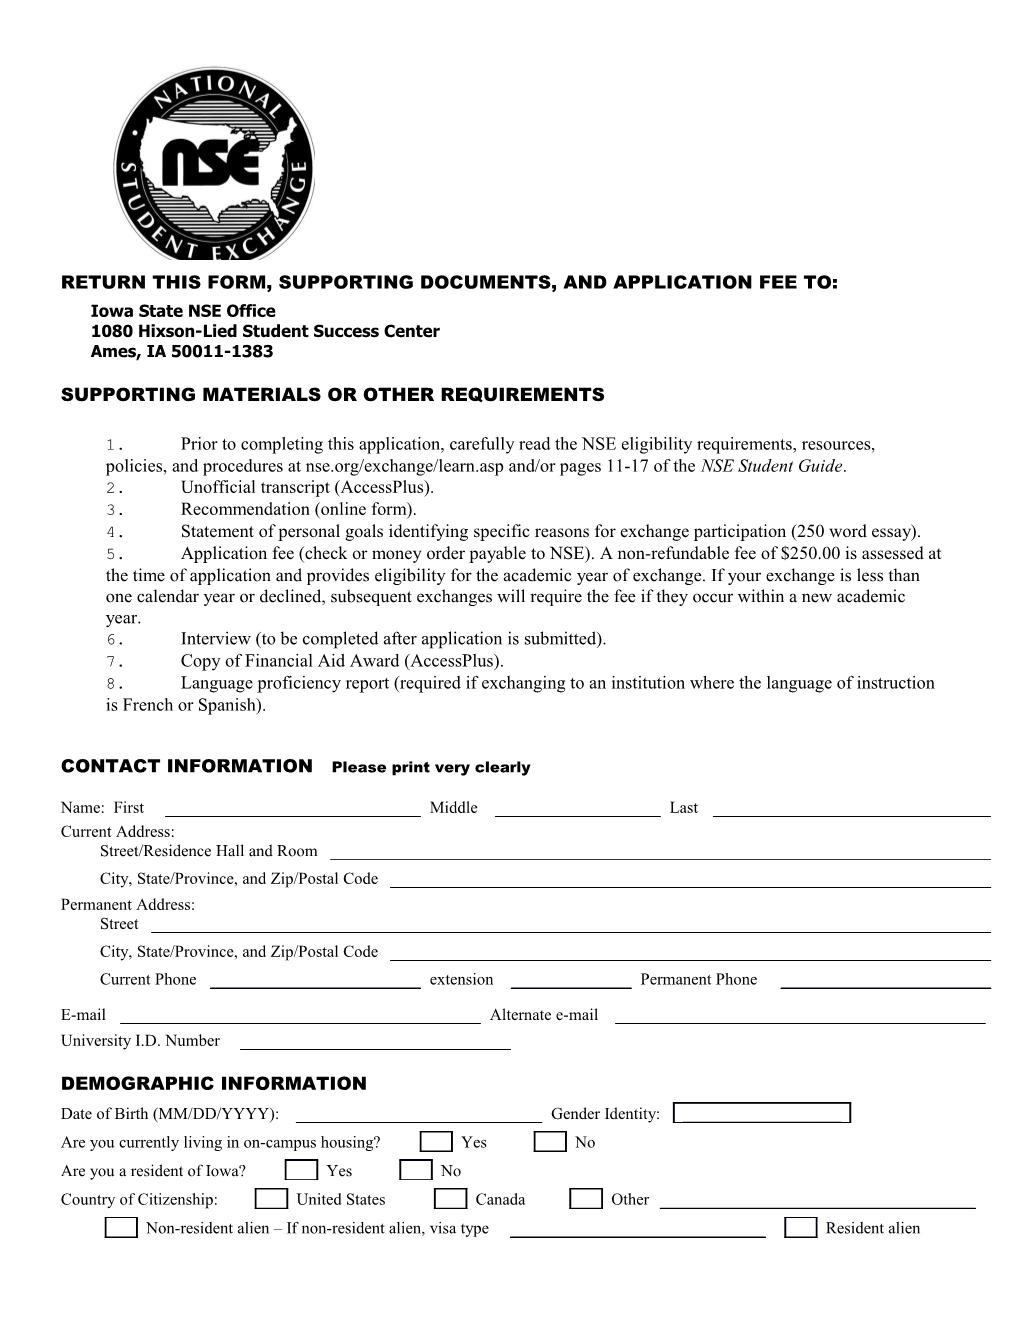 Return This Form, Supporting Documents, and Application Fee To